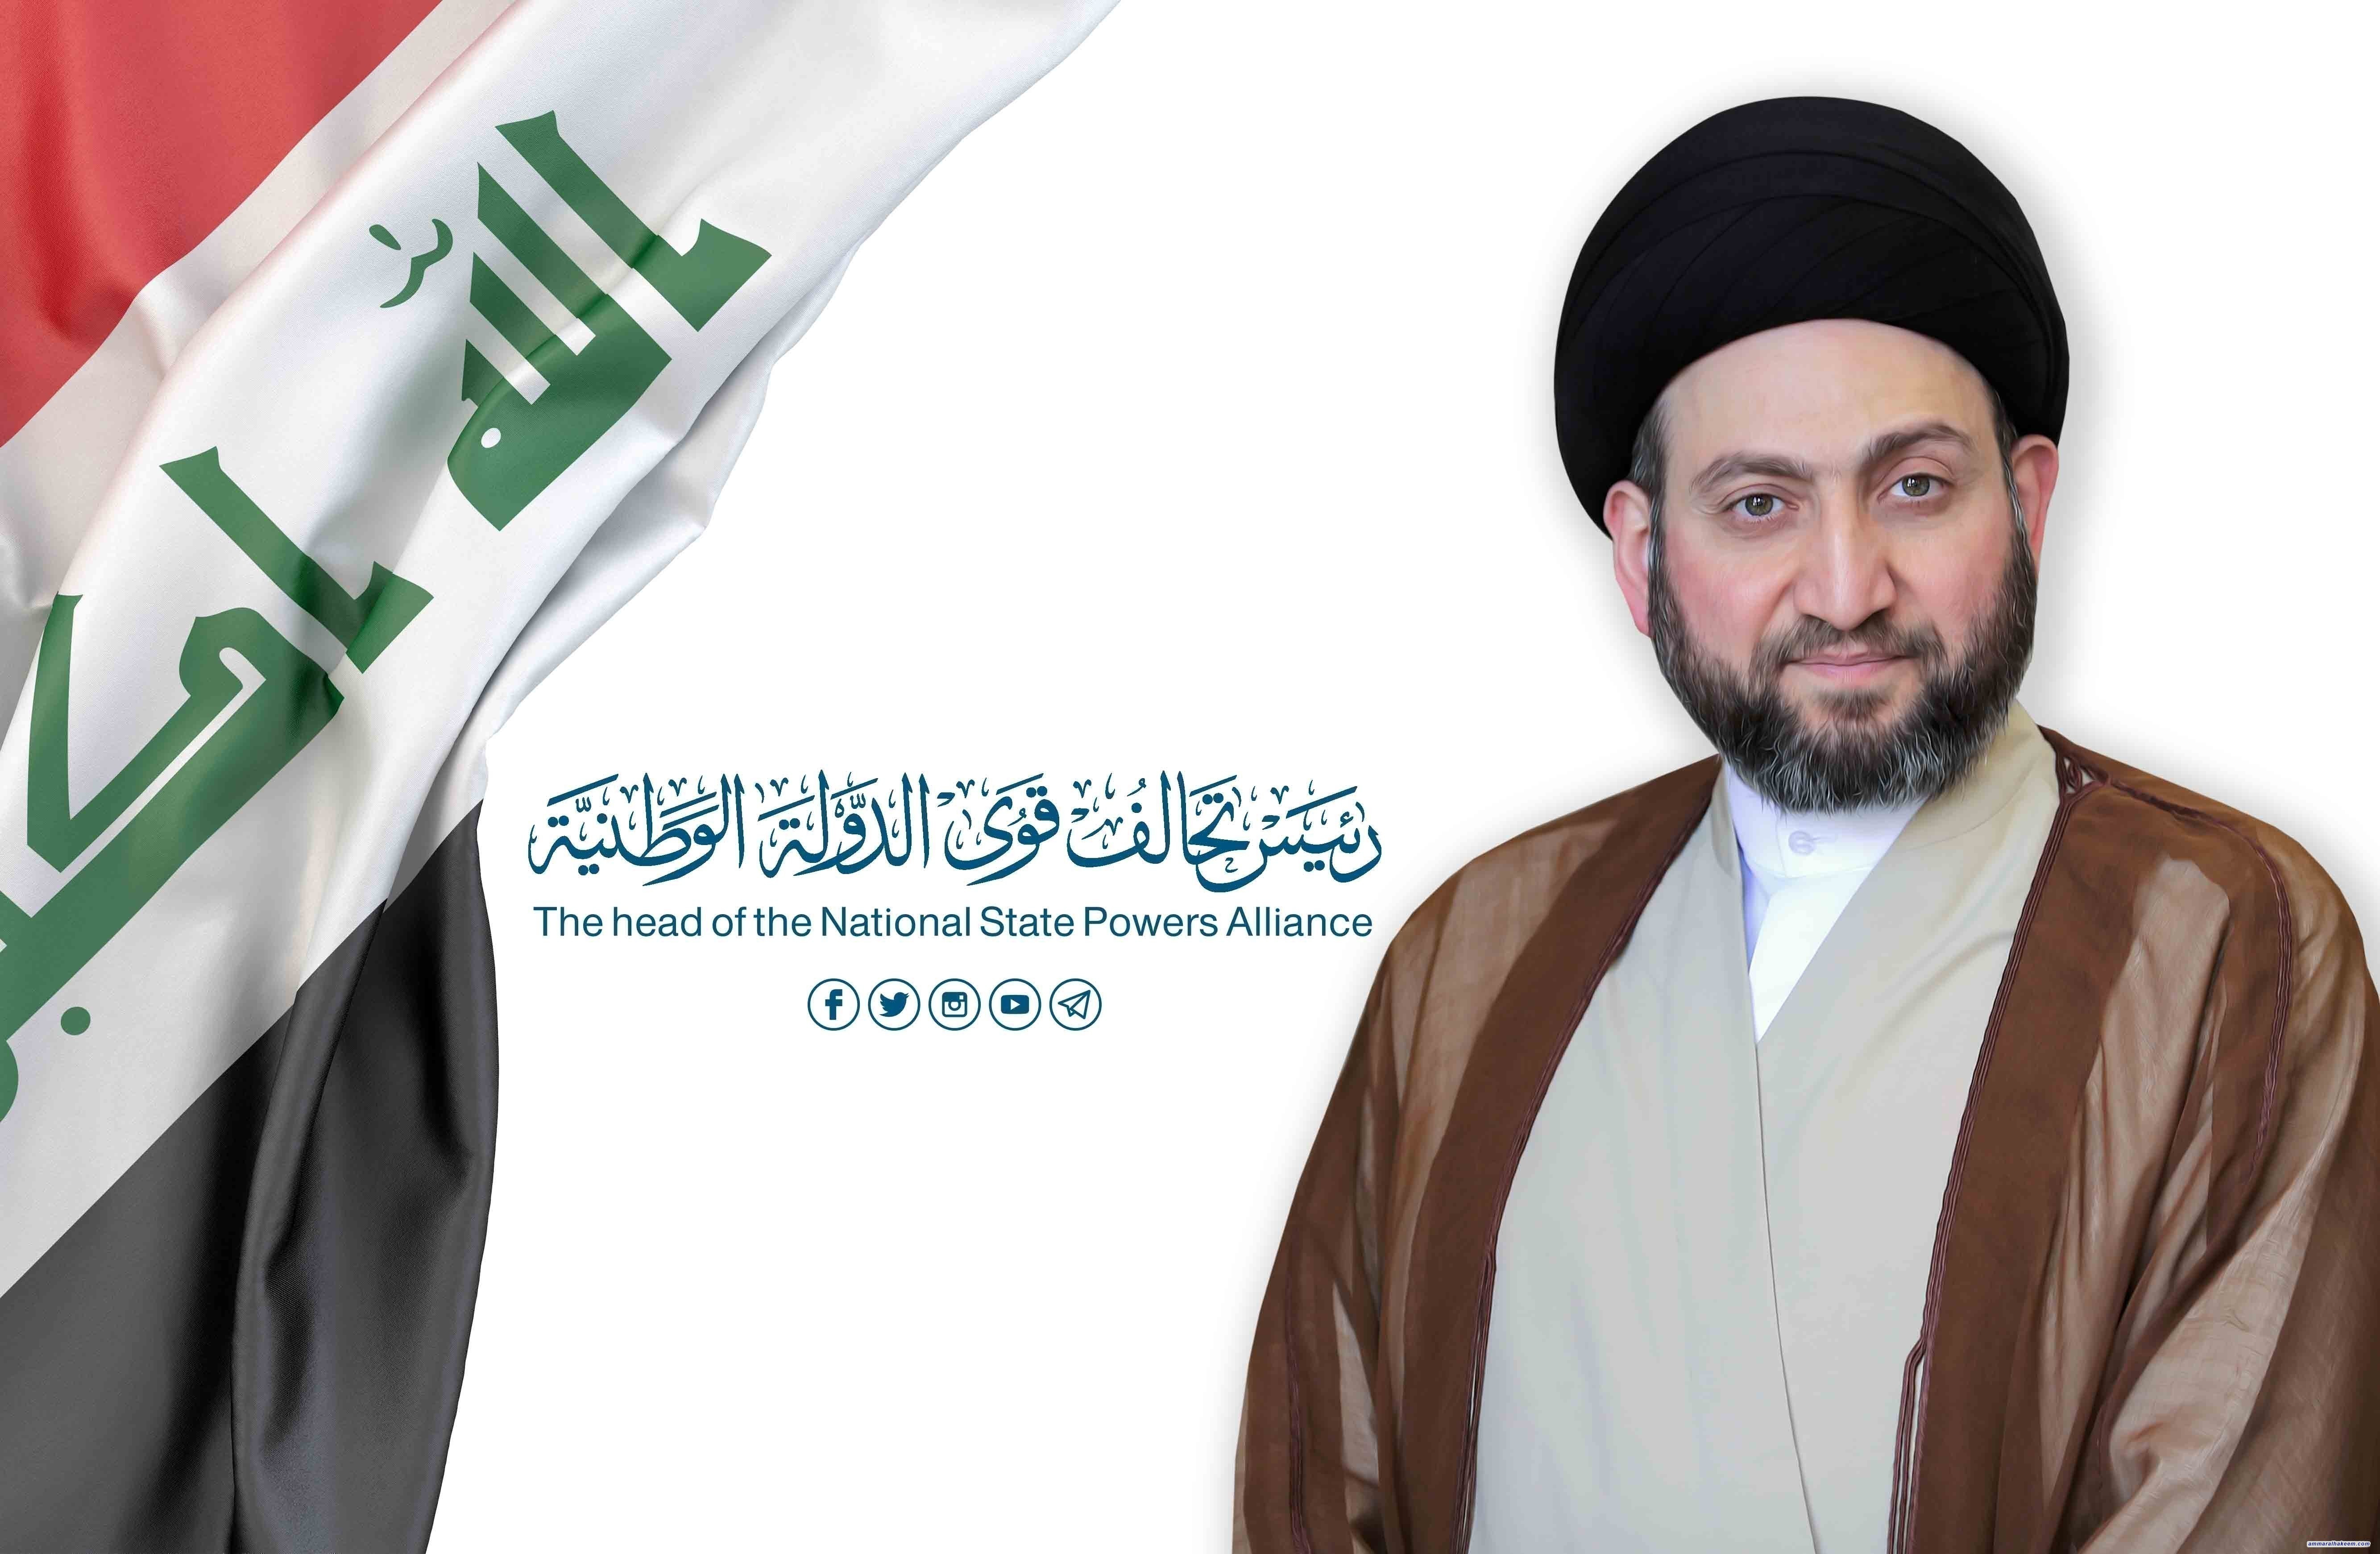 Sayyid Al-Hakeem lauds Popular Mobilization parade, calls it show of high readiness